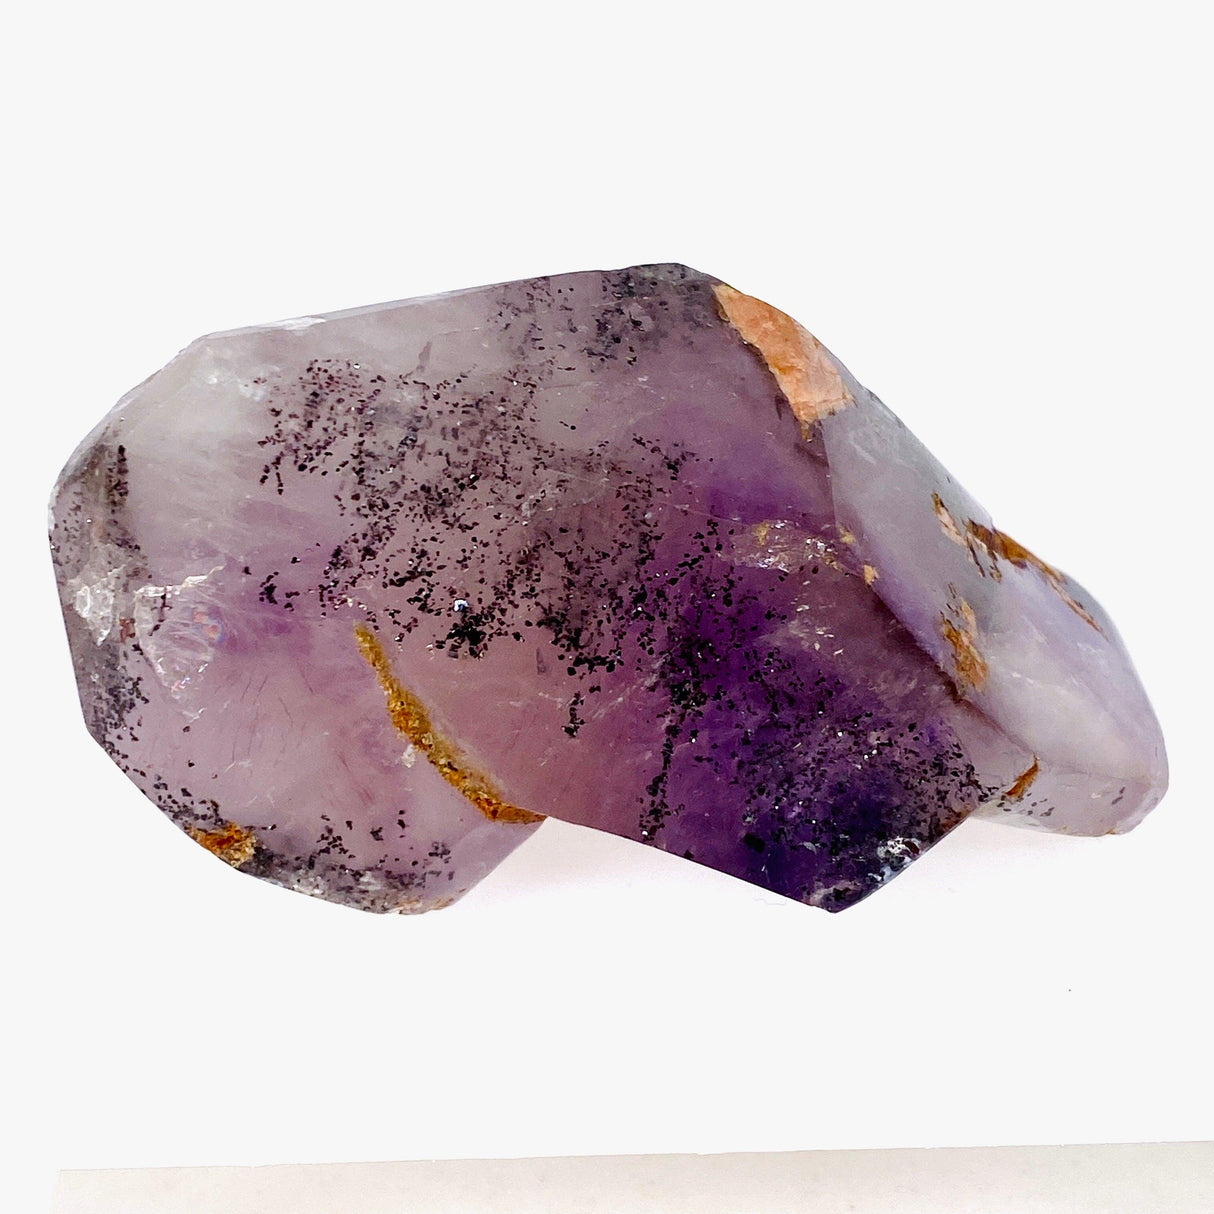 Smokey Amethyst with Lepidocrocite inclusions polished crystal 